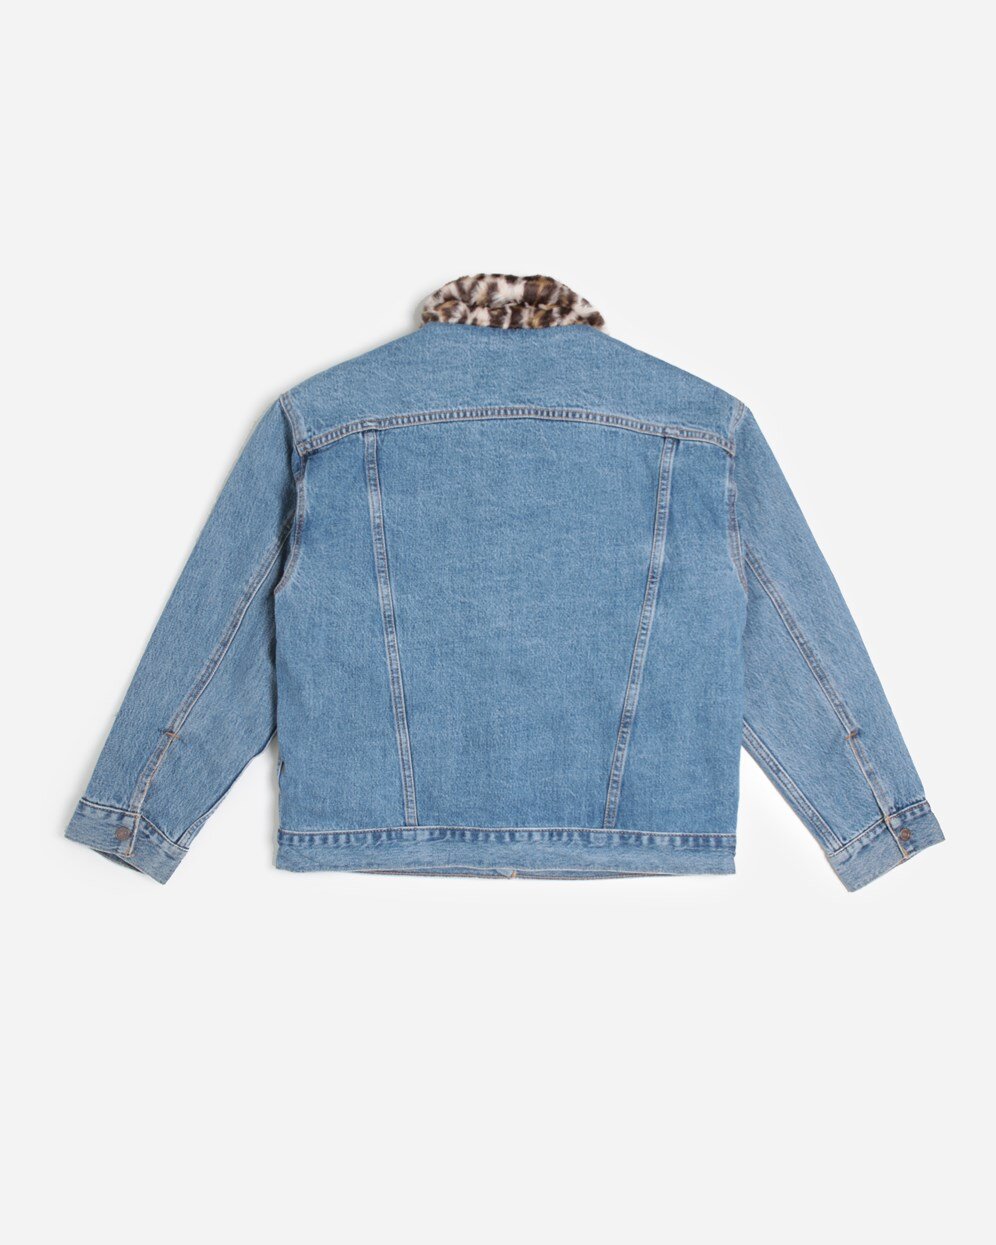 Check Out the WMNS Levi's Leopard Denim Trucker Jacket — CNK Daily  (ChicksNKicks)